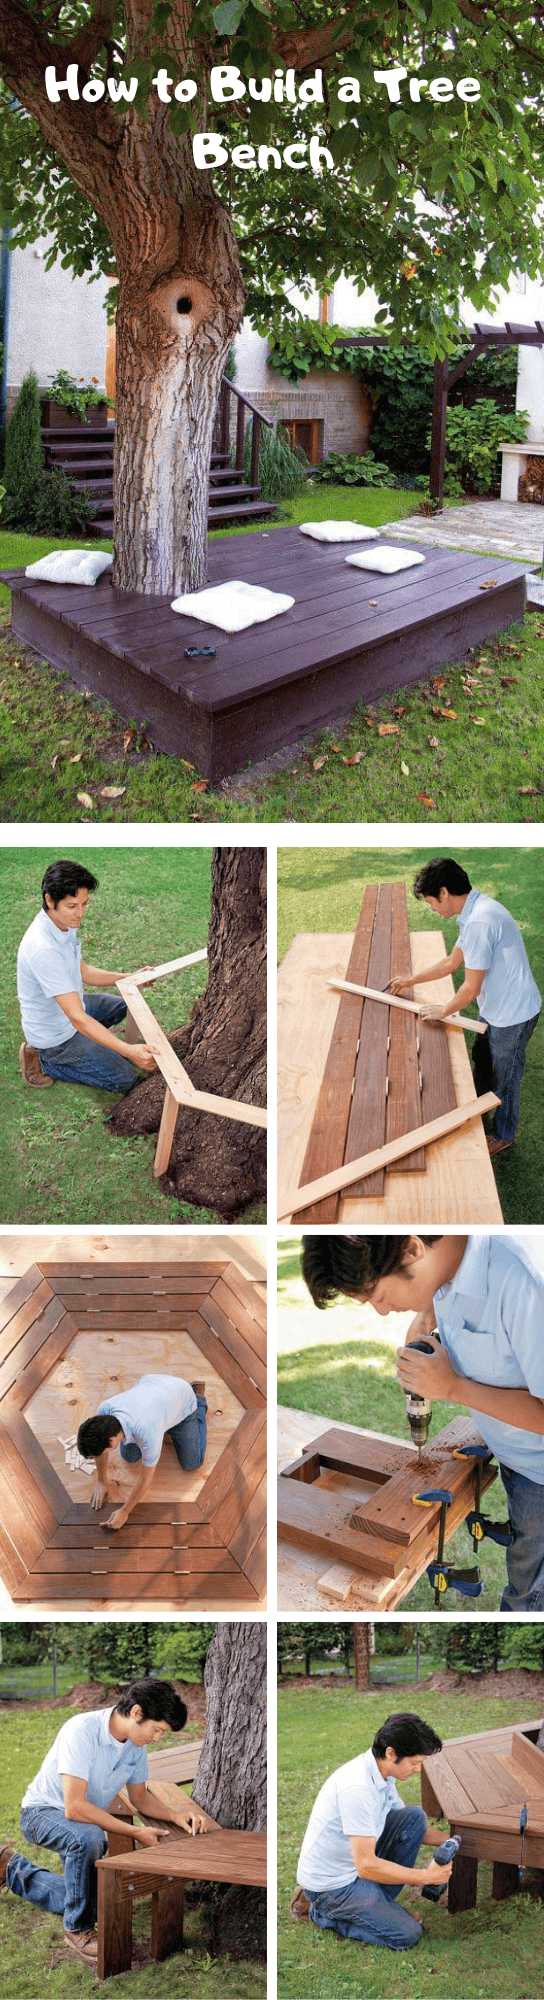 How to Build a Tree Bench